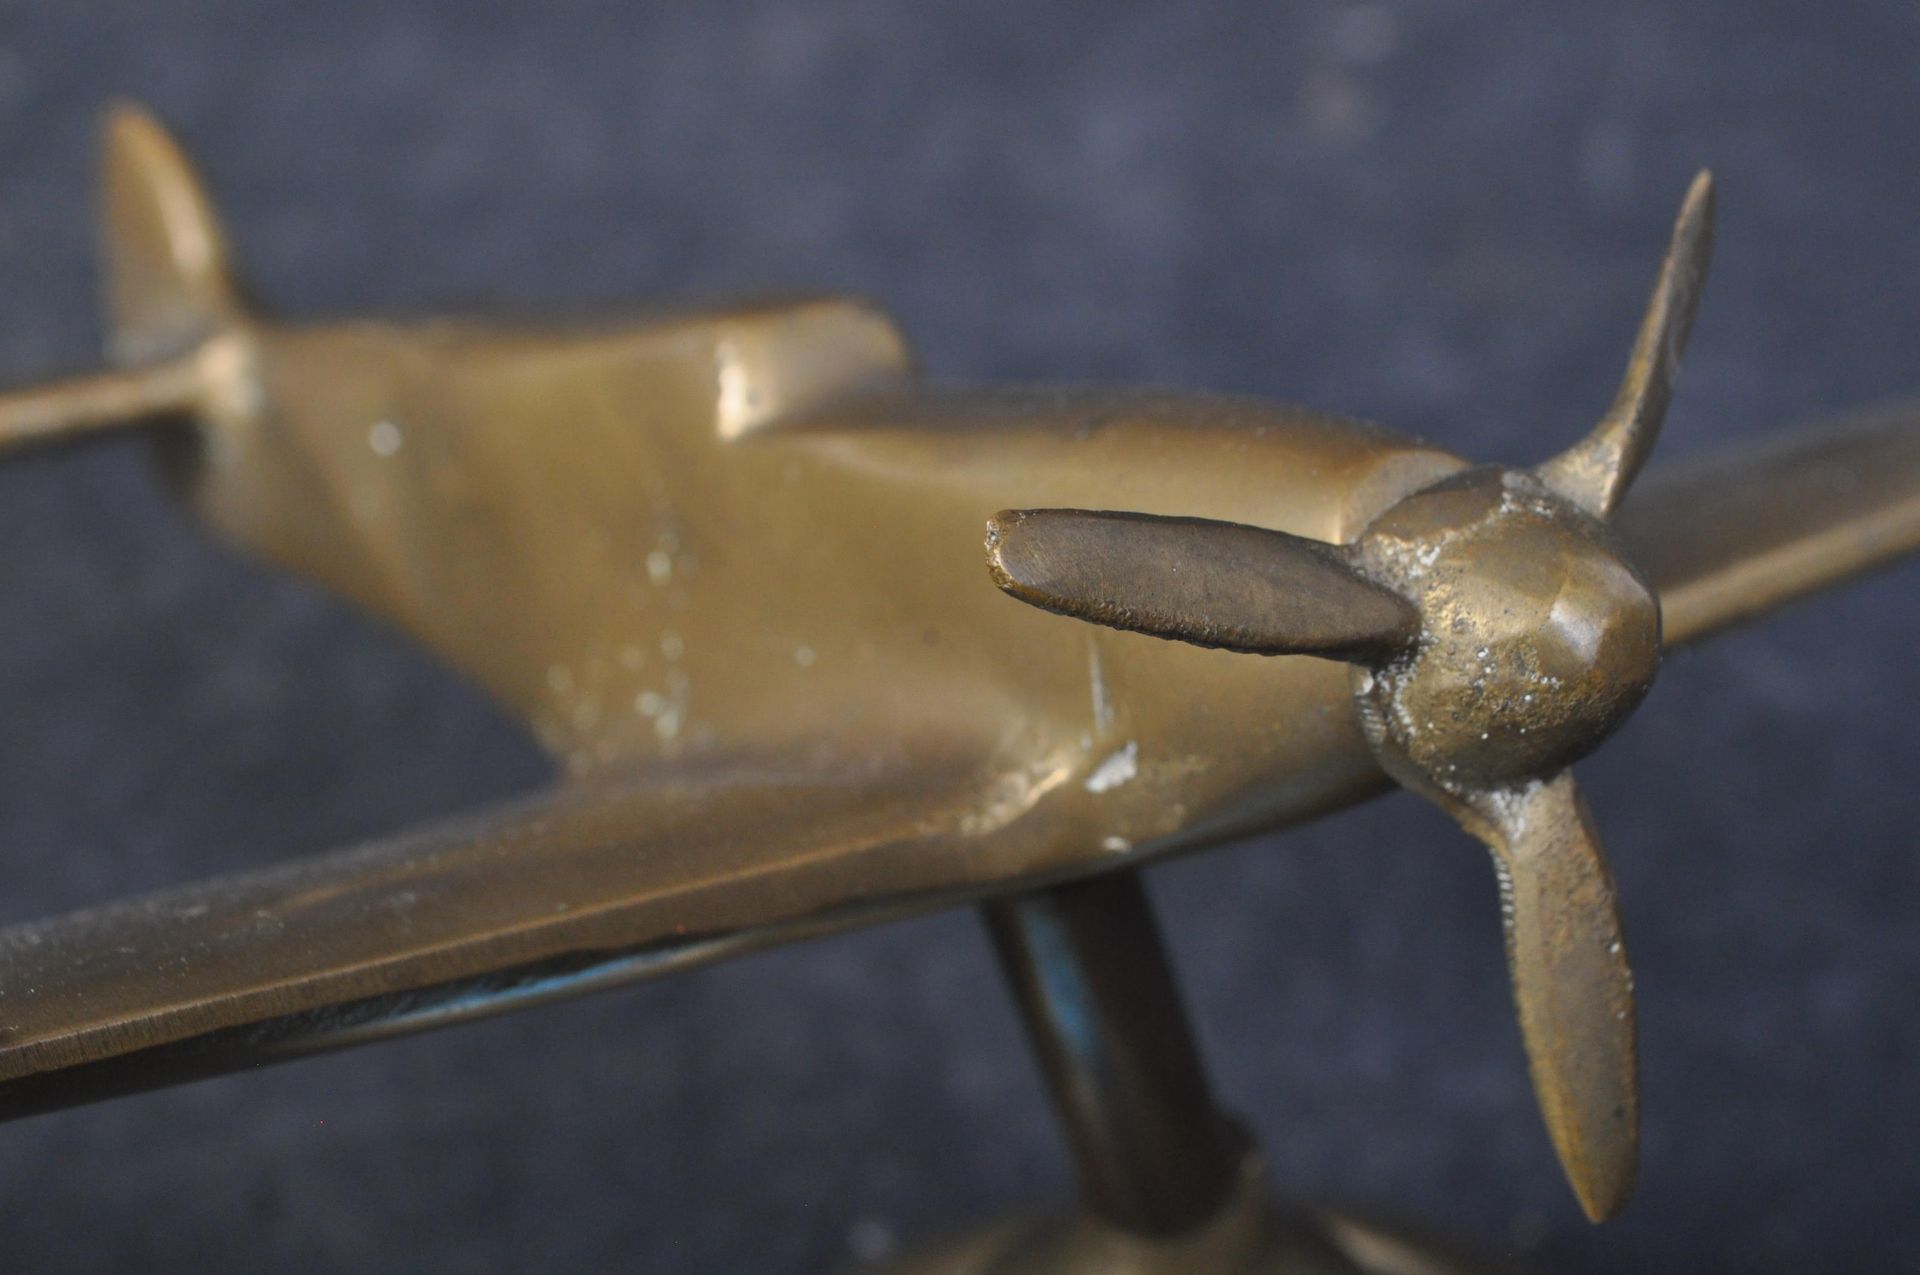 20TH CENTURY BRASS TRENCH ART SPITFIRE ORNAMENT - Image 4 of 5